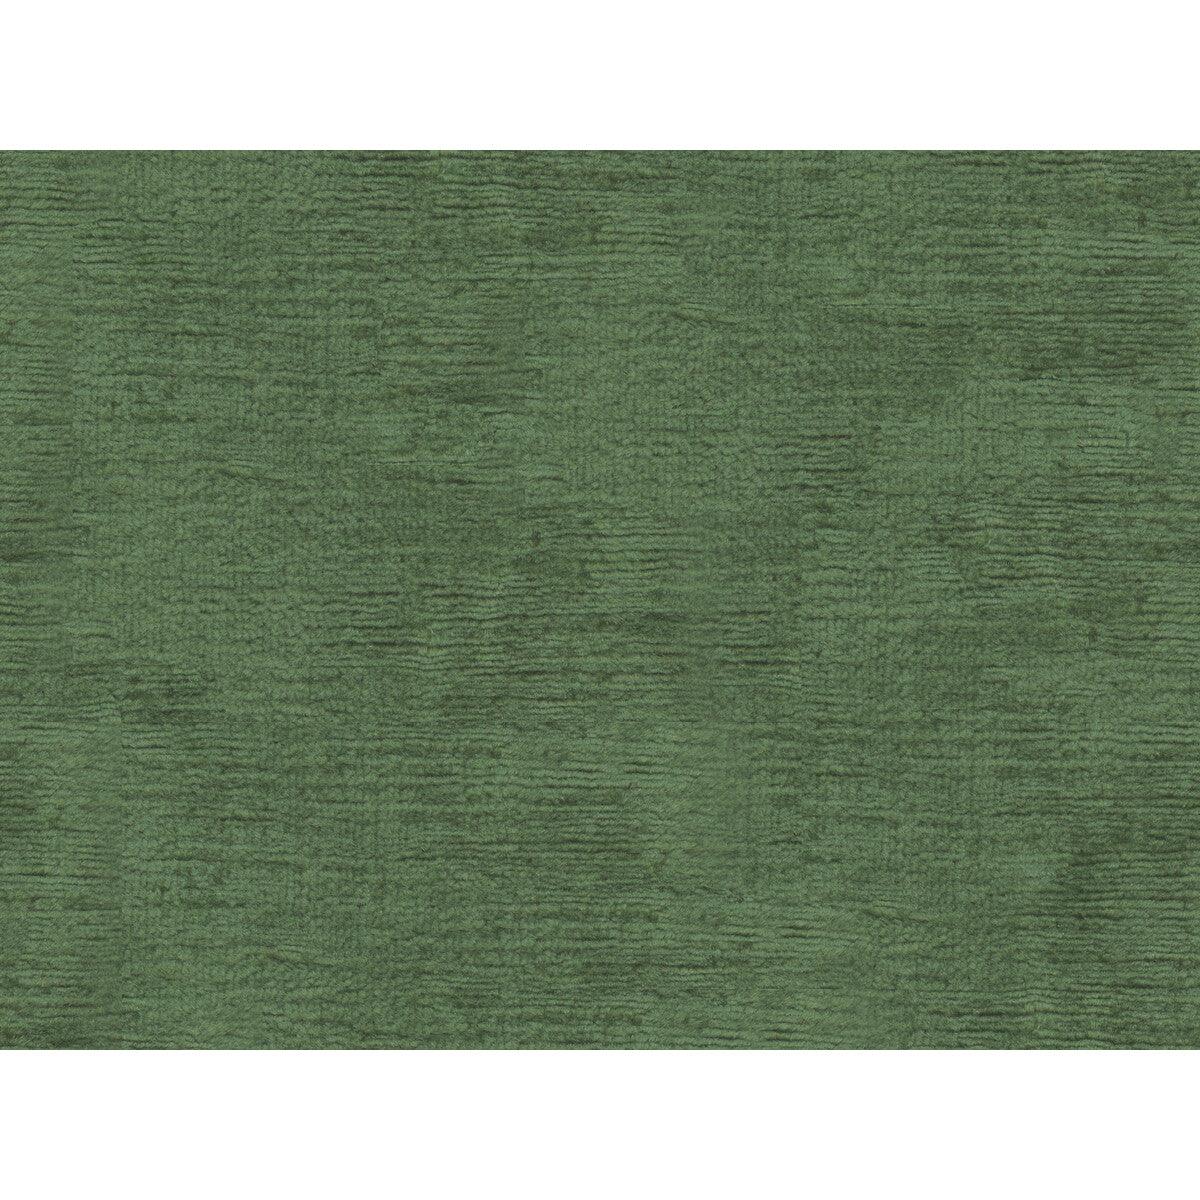 Fulham Linen V fabric in herb color - pattern 2016133.333.0 - by Lee Jofa